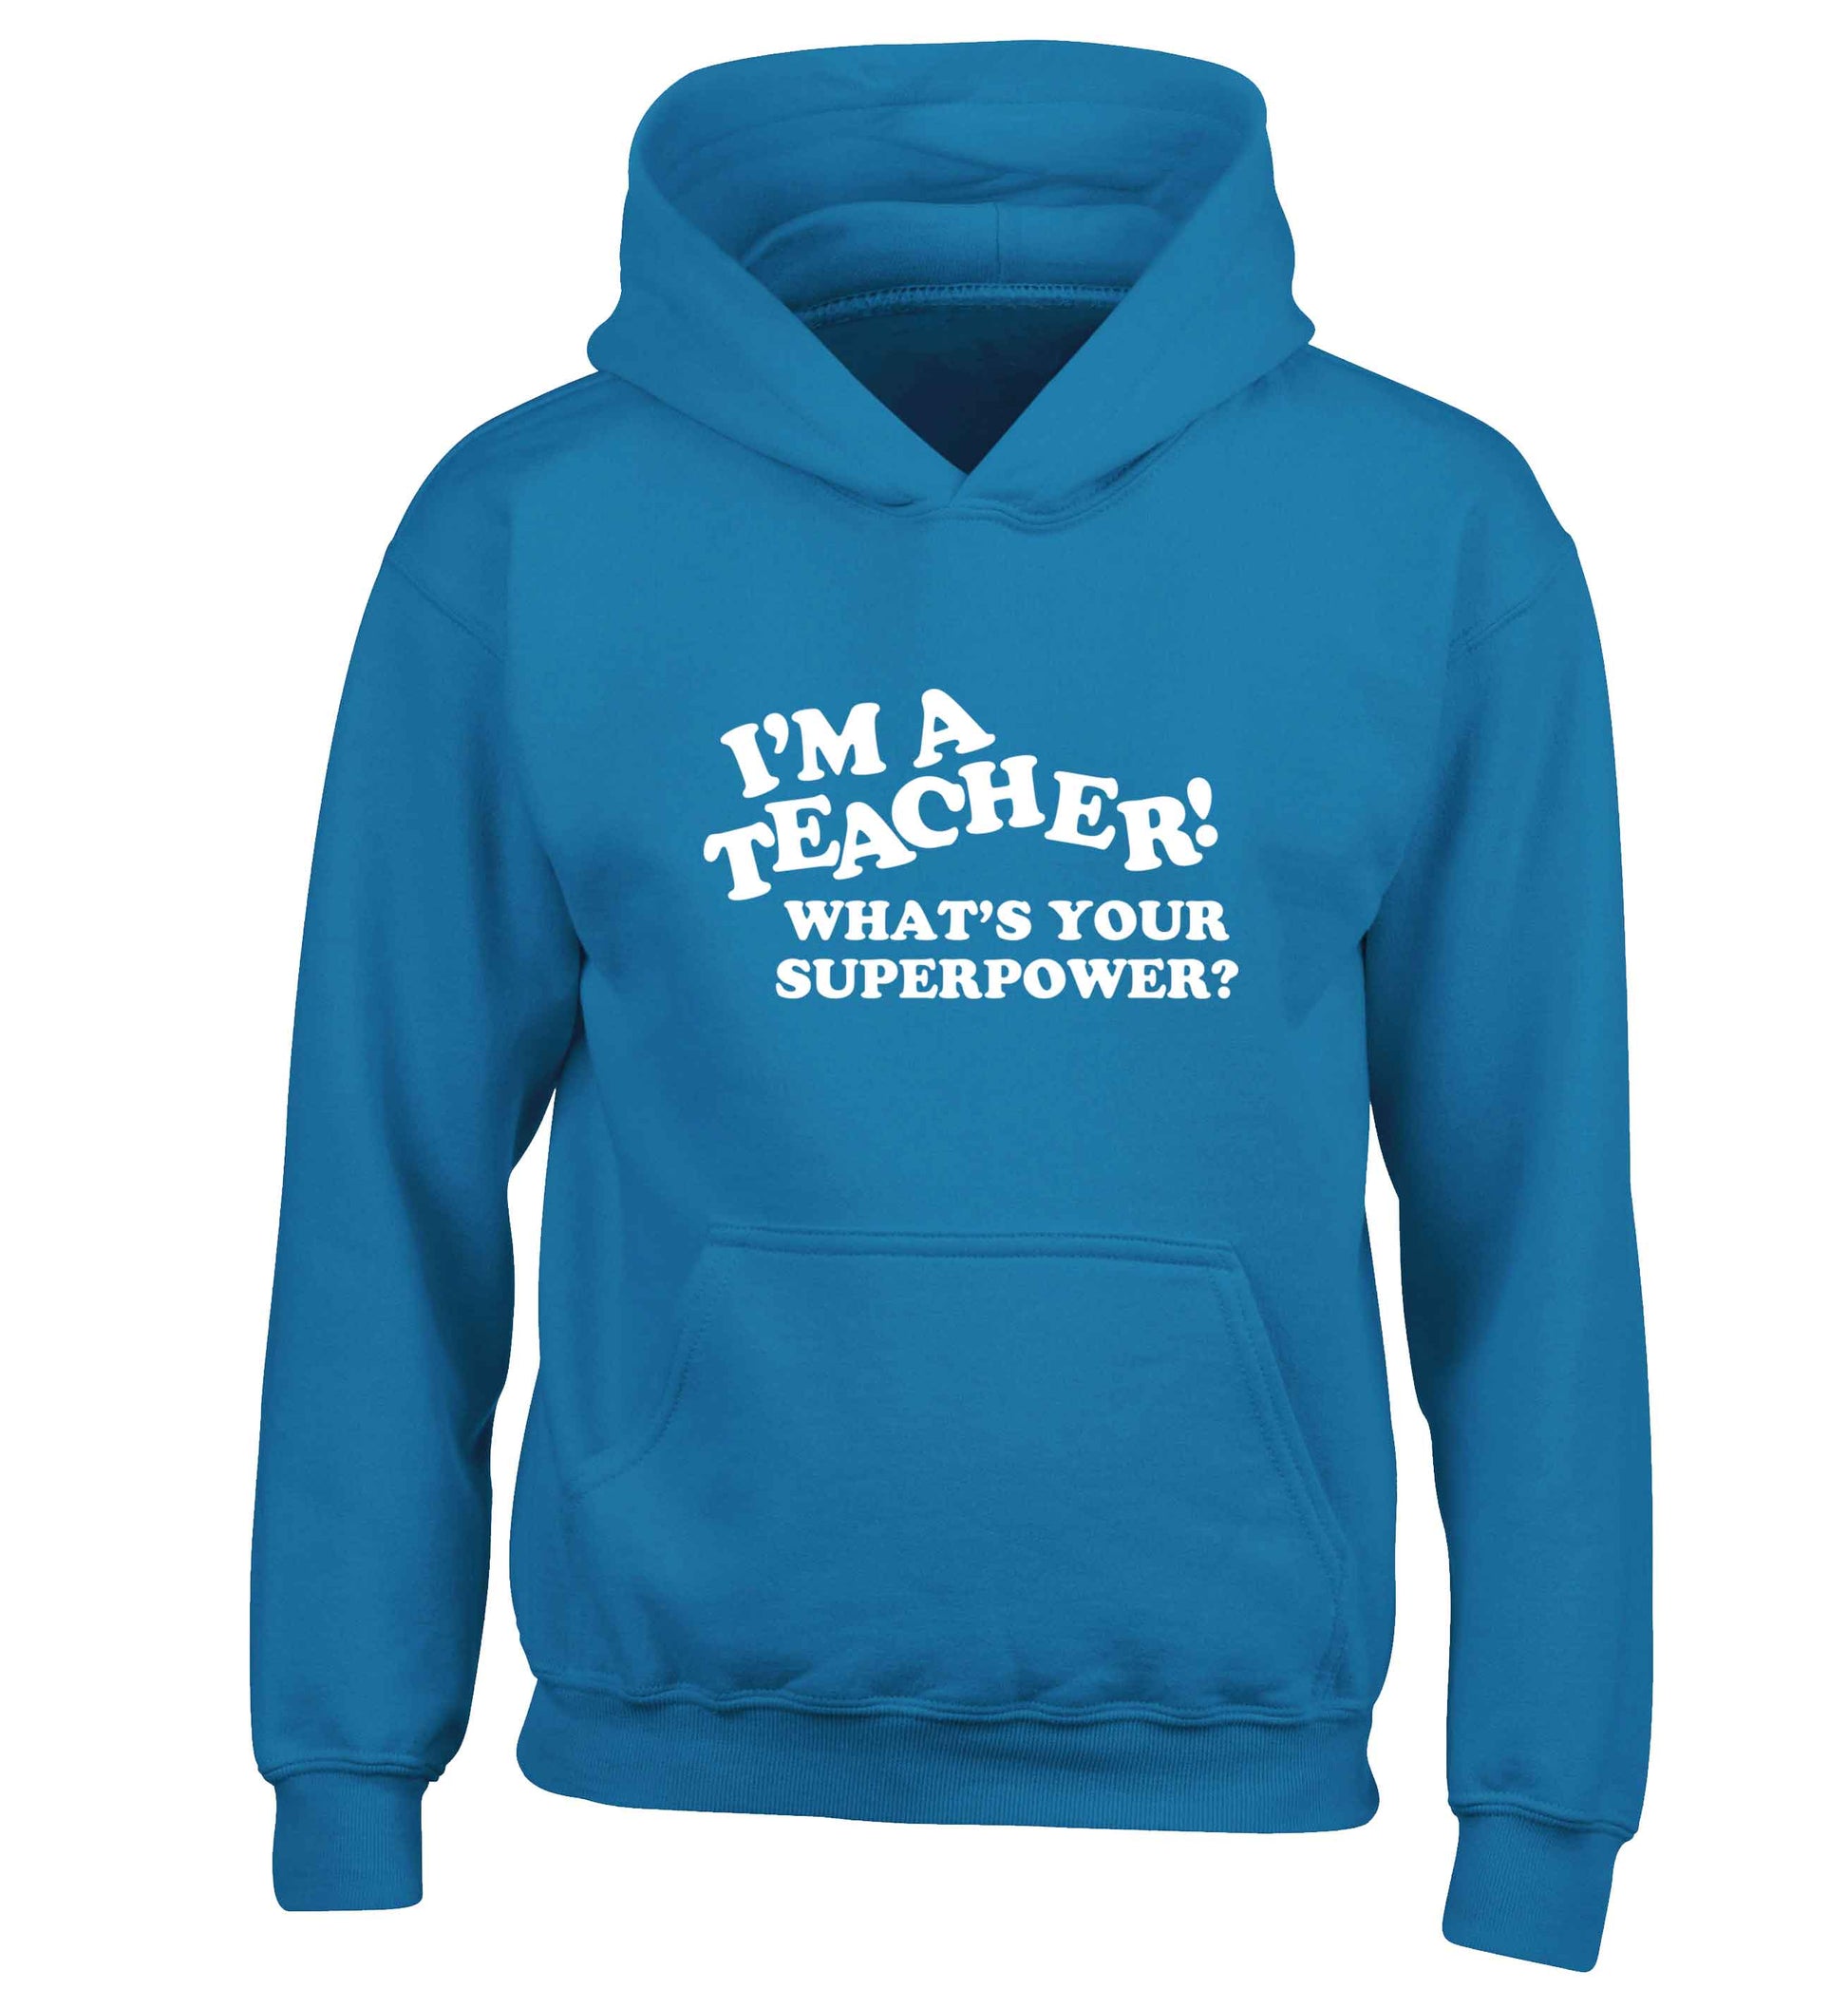 I'm a teacher what's your superpower?! children's blue hoodie 12-13 Years